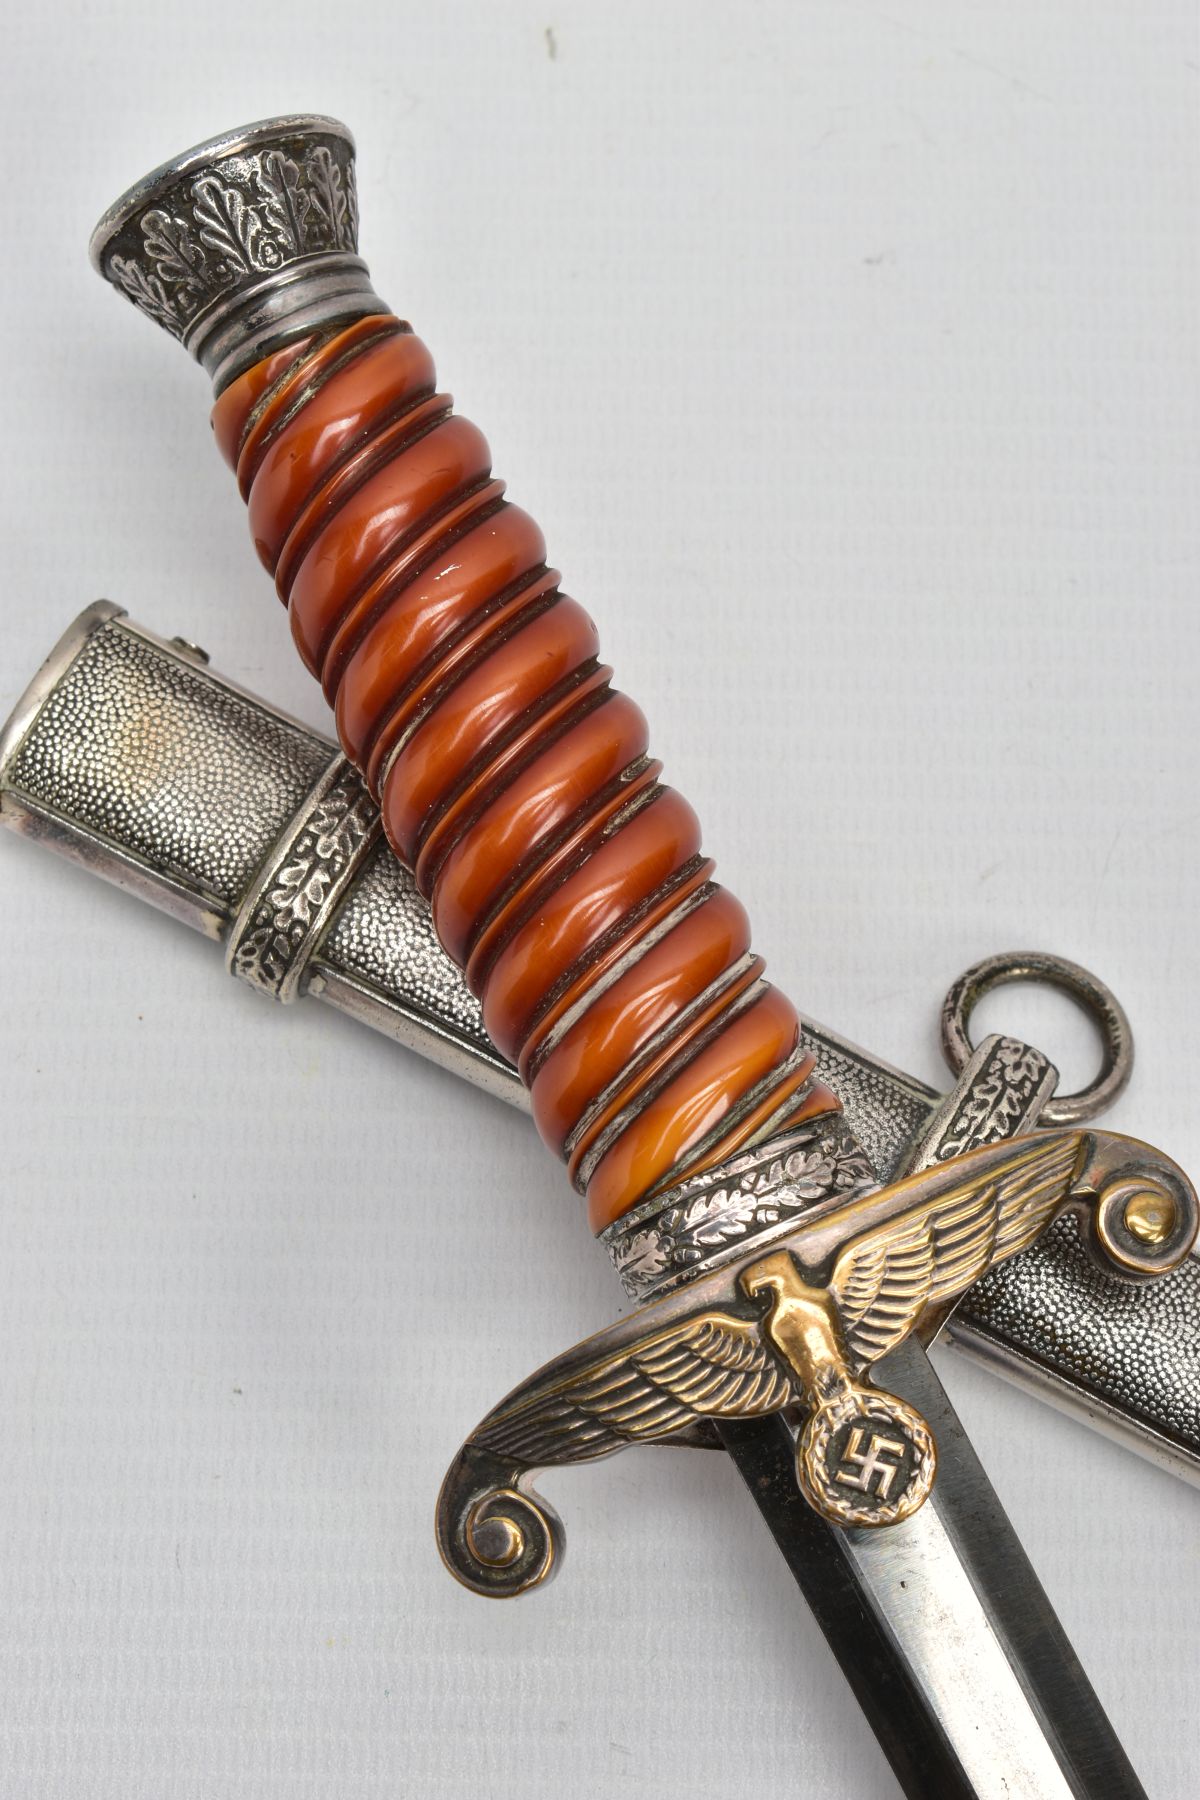 GERMAN 3RD REICH ARMY HEER DRESS DAGGER, WWII period by Carl Eickhorn, Solingen, with etched maker - Image 2 of 7